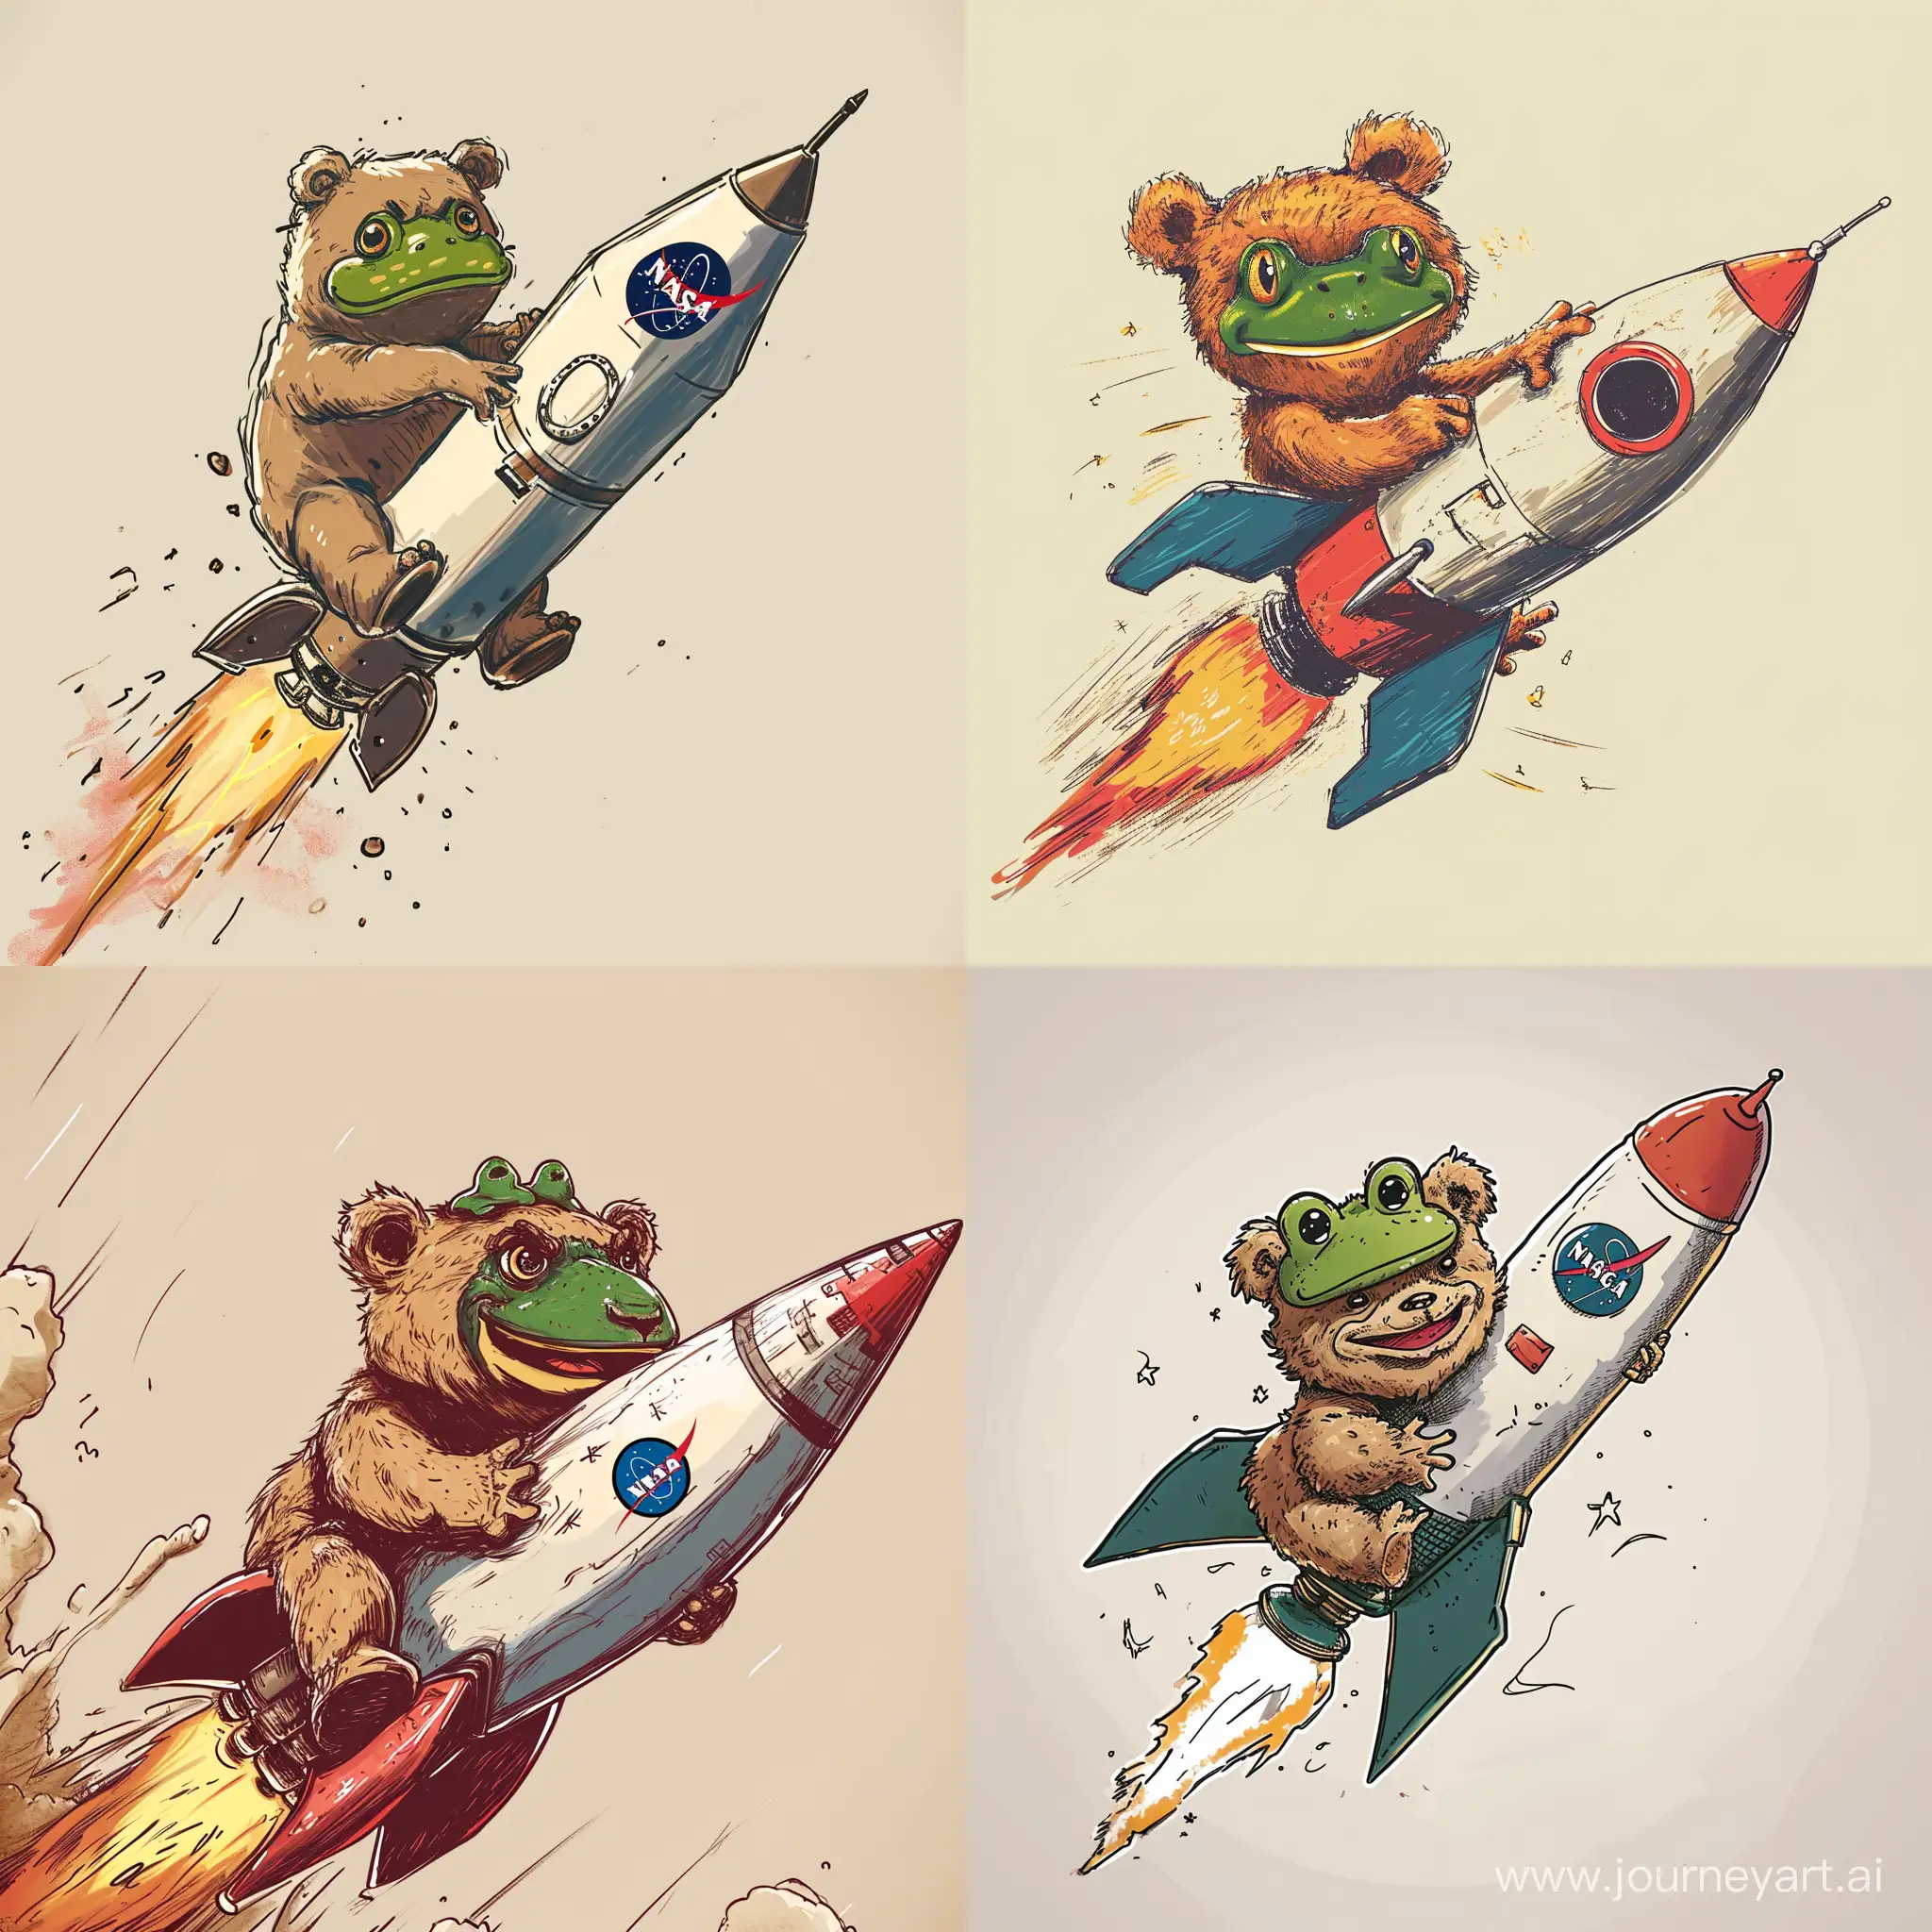 Bear-Masculine-with-Pepe-Frog-Face-Riding-NASA-Rocket-in-Manga-Drawing-Style